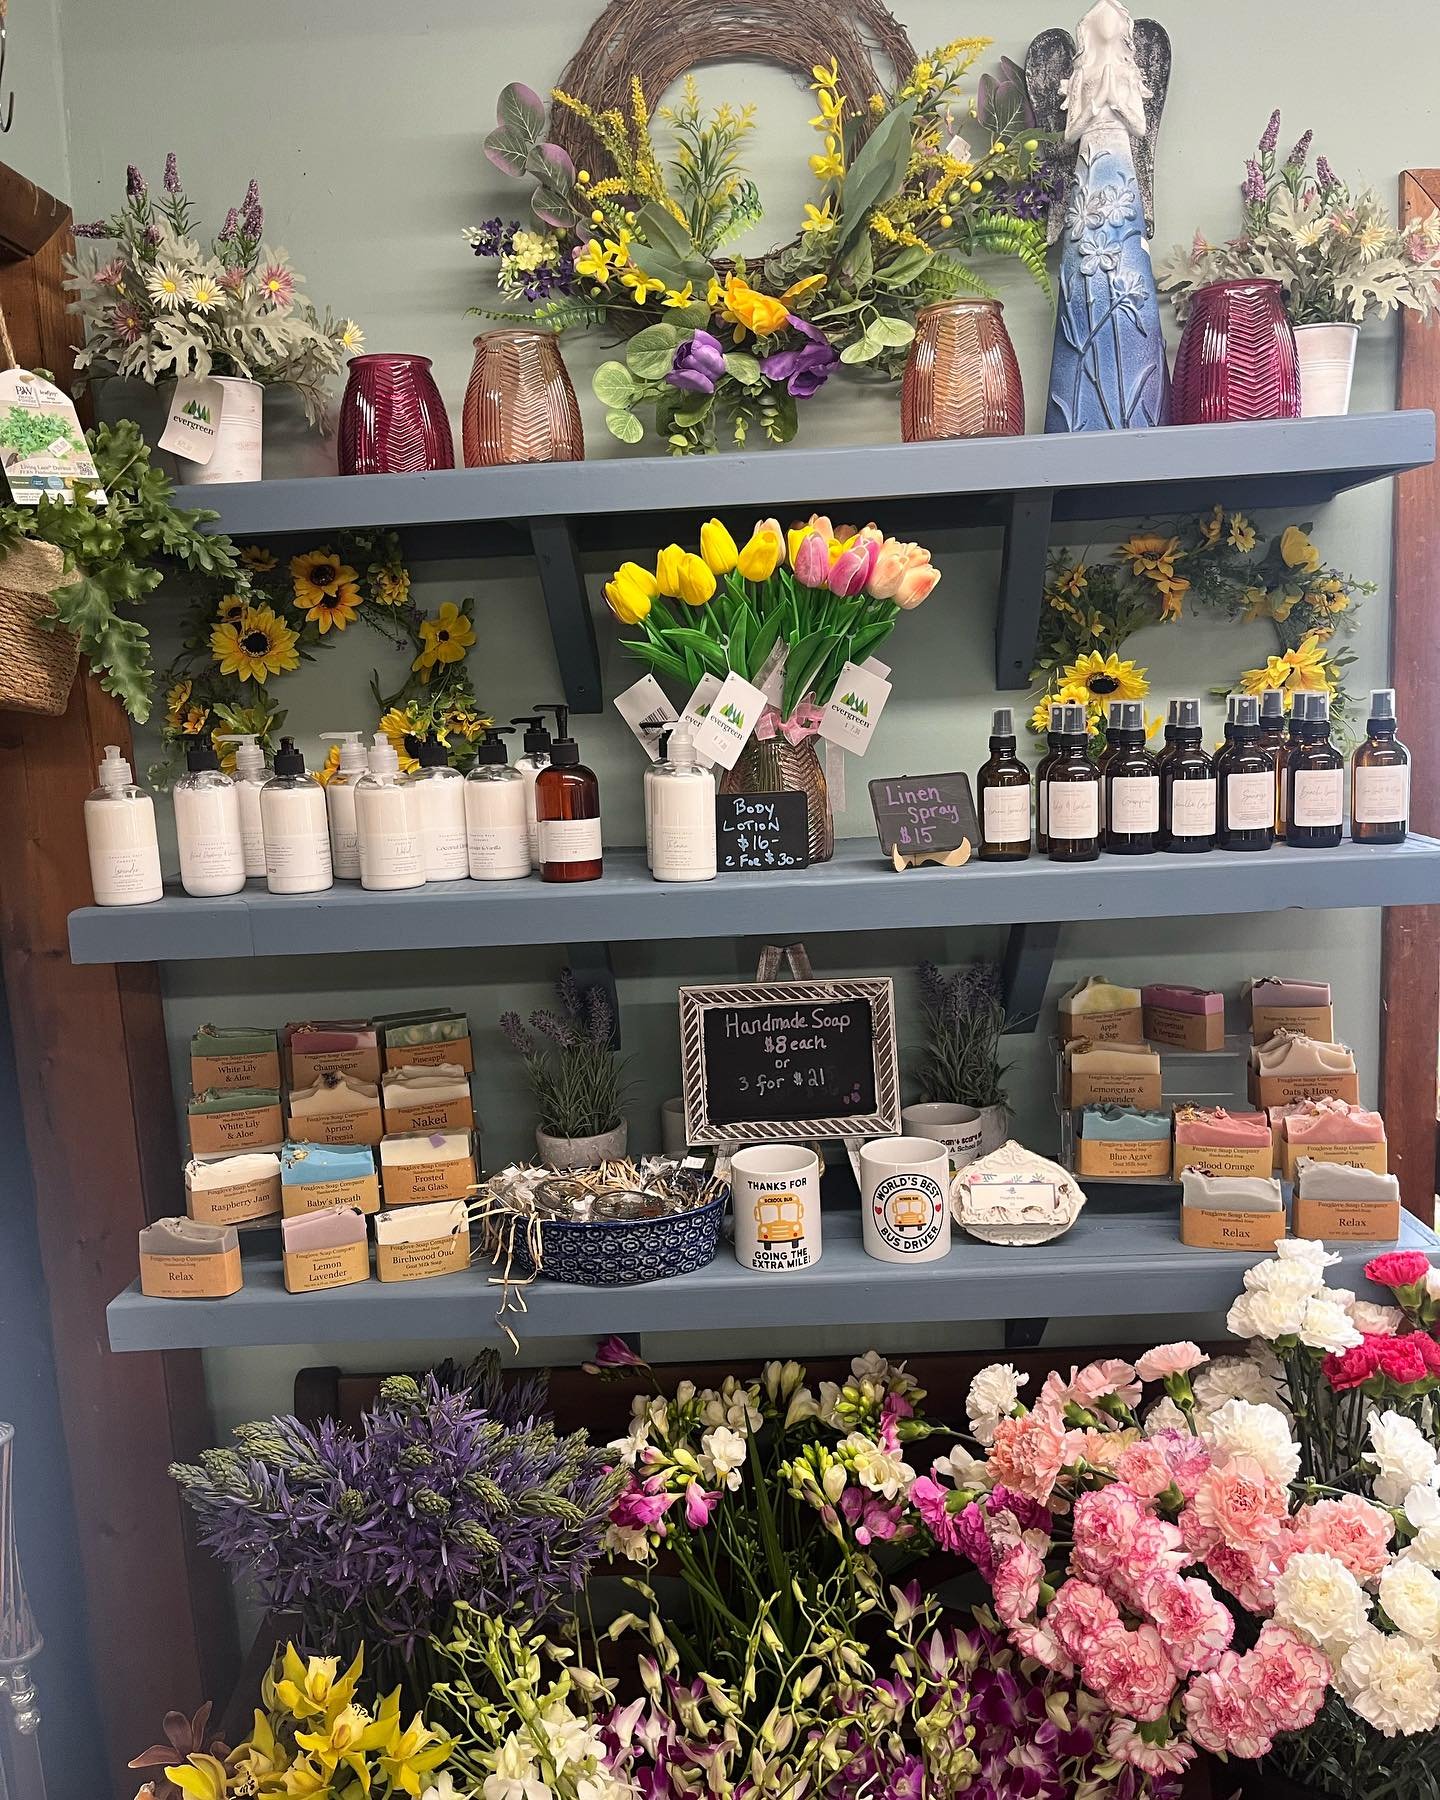 Town and Country Nursery is stocked up with all your last minute Mother&rsquo;s Day gifts!! 🧼 

We also freshly stocked @wildcraft_herb_shoppe and @longriverlocal today!! 🫶🏼💕✨🤍

This weekend we will be at the Milford Artisan Market as well! Come